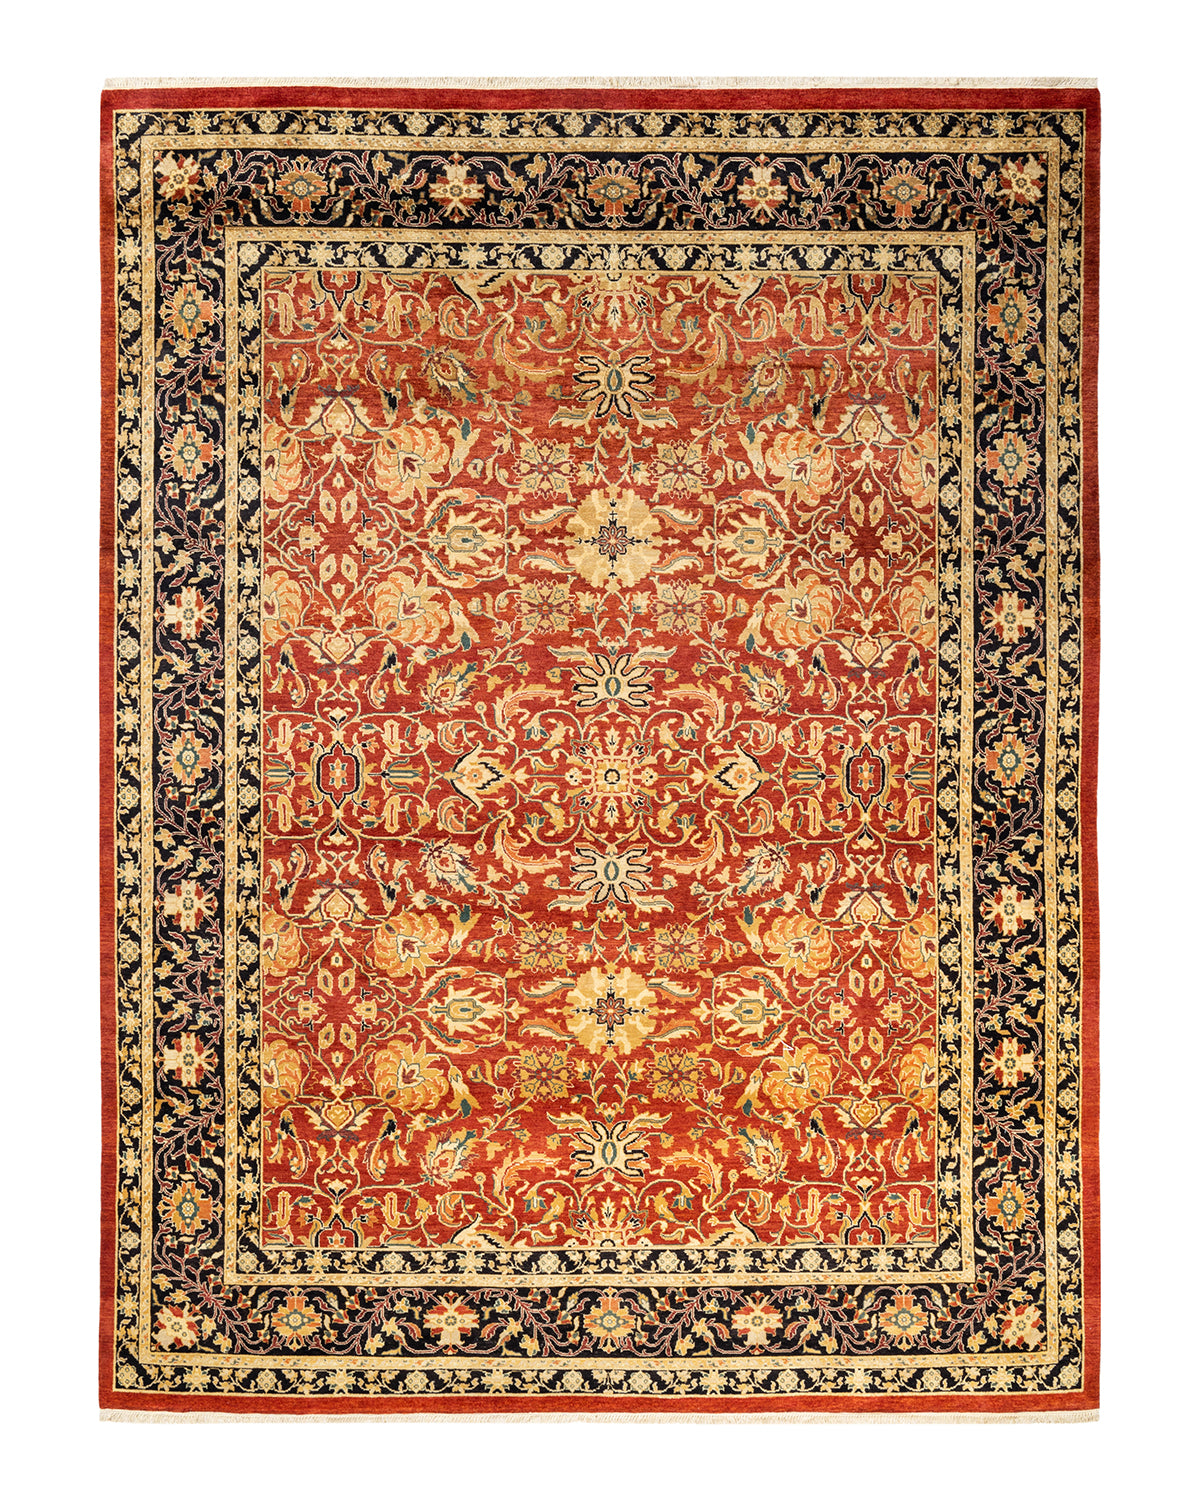 Eclectic, One-of-a-Kind Hand-Knotted Area Rug  - Orange, 8' 0" x 10' 7"